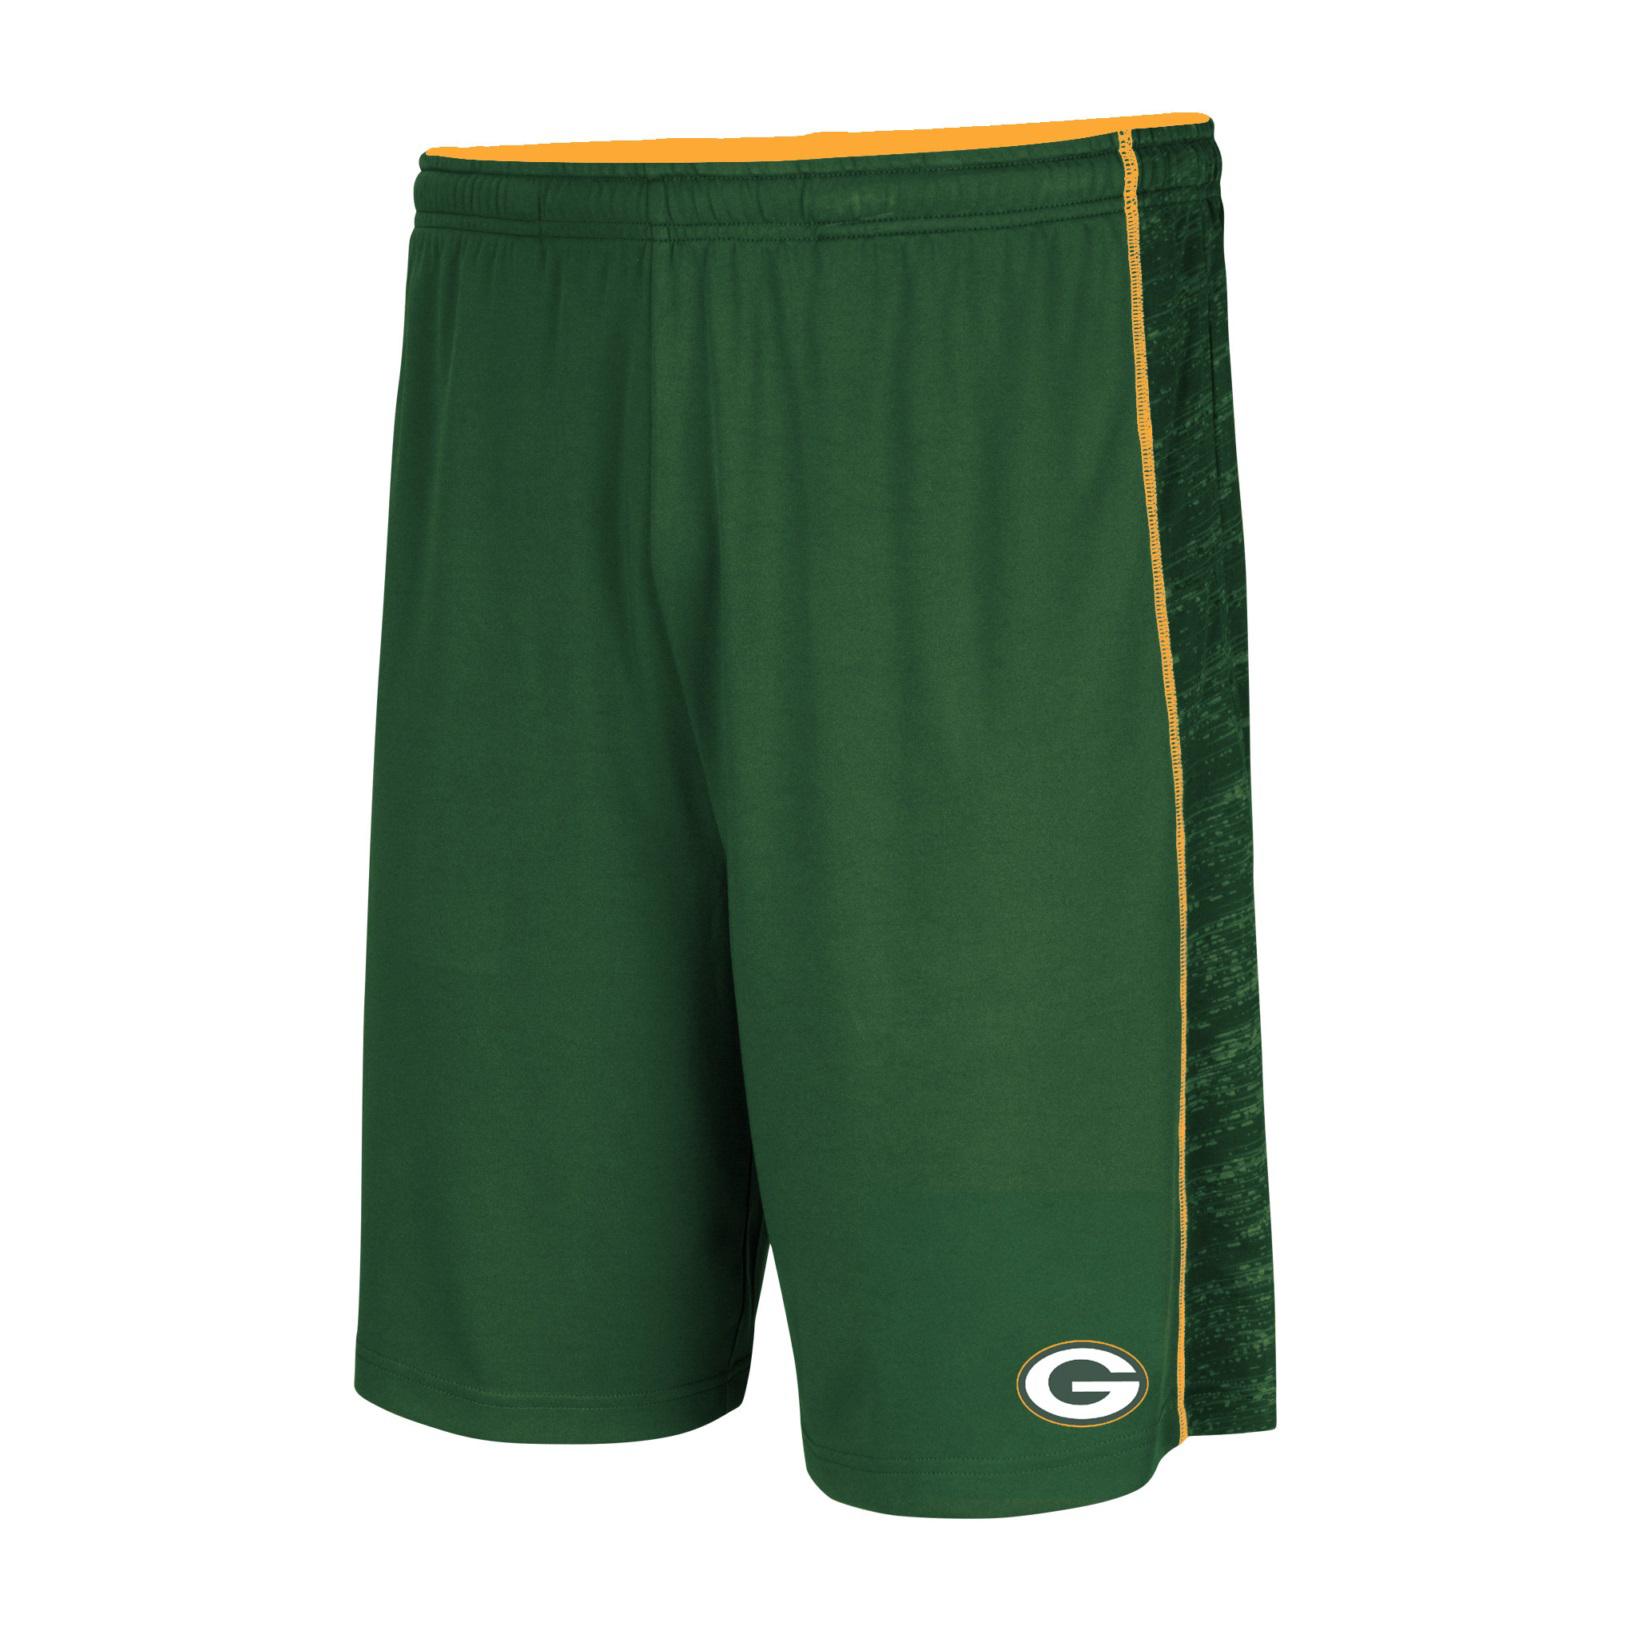 NFL Men's Athletic Shorts - Green Bay Packers